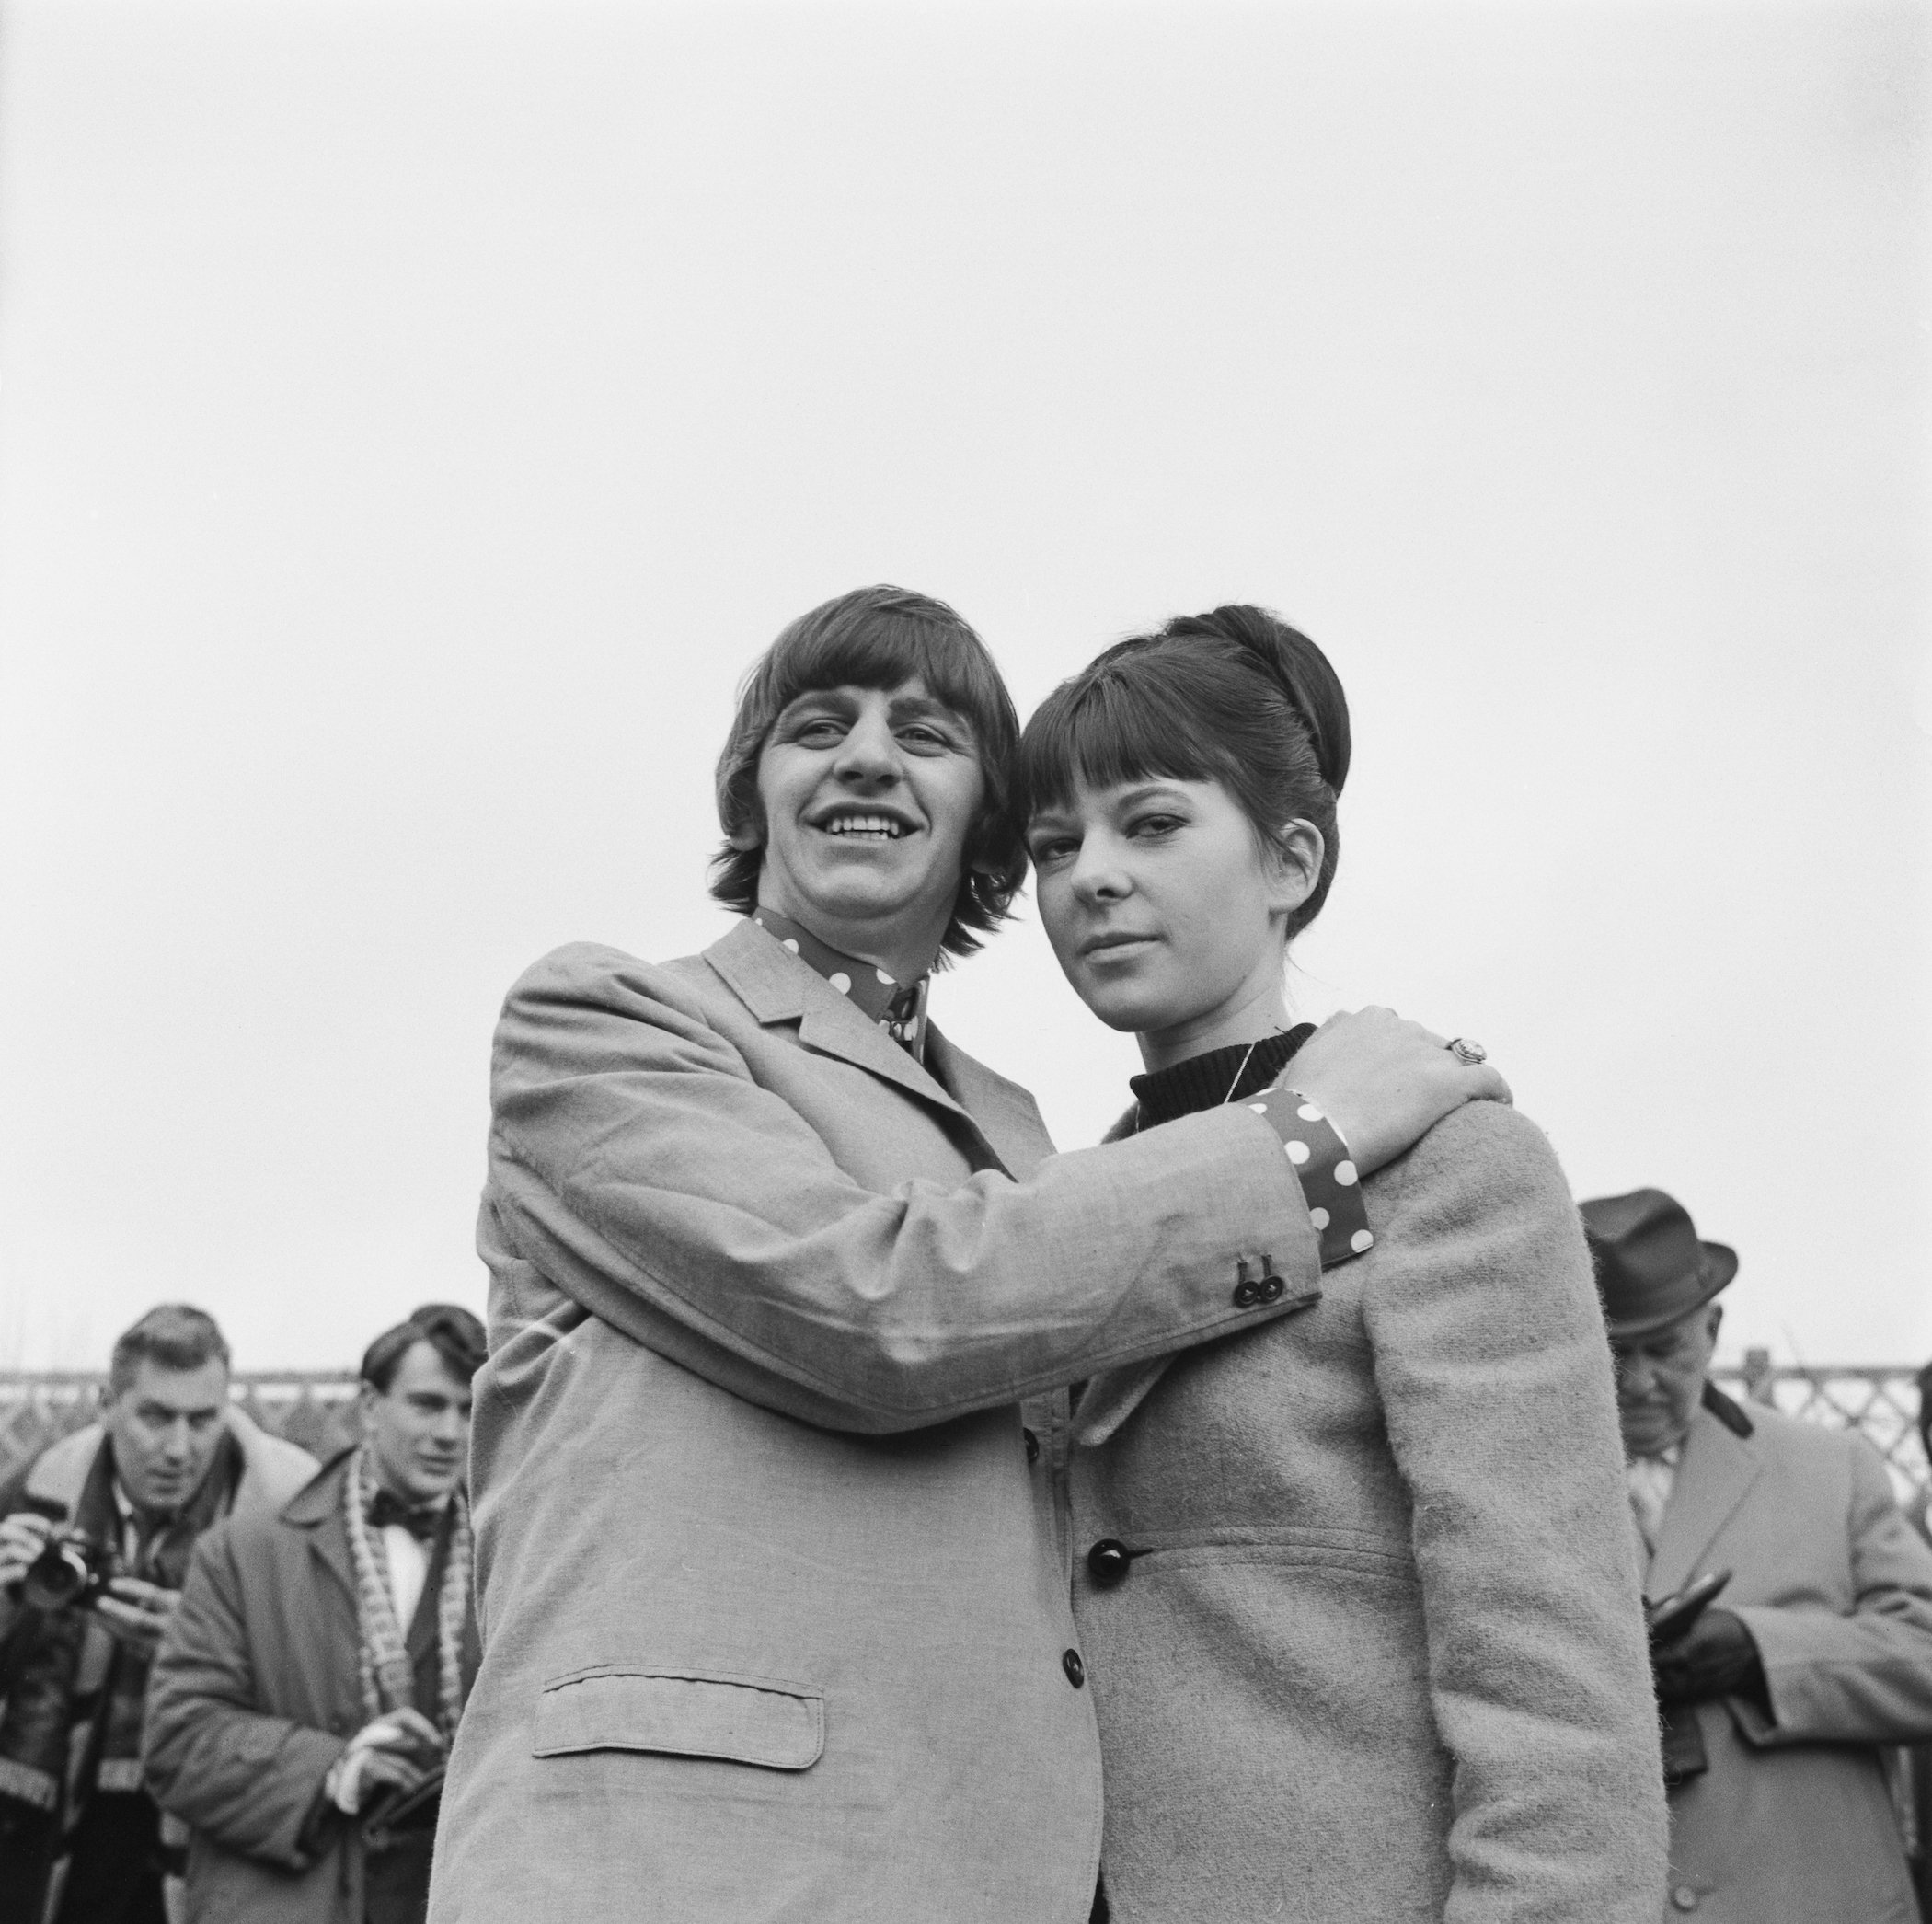 English drummer Ringo Starr of the Beatles with his wife Maureen Cox during their honeymoon